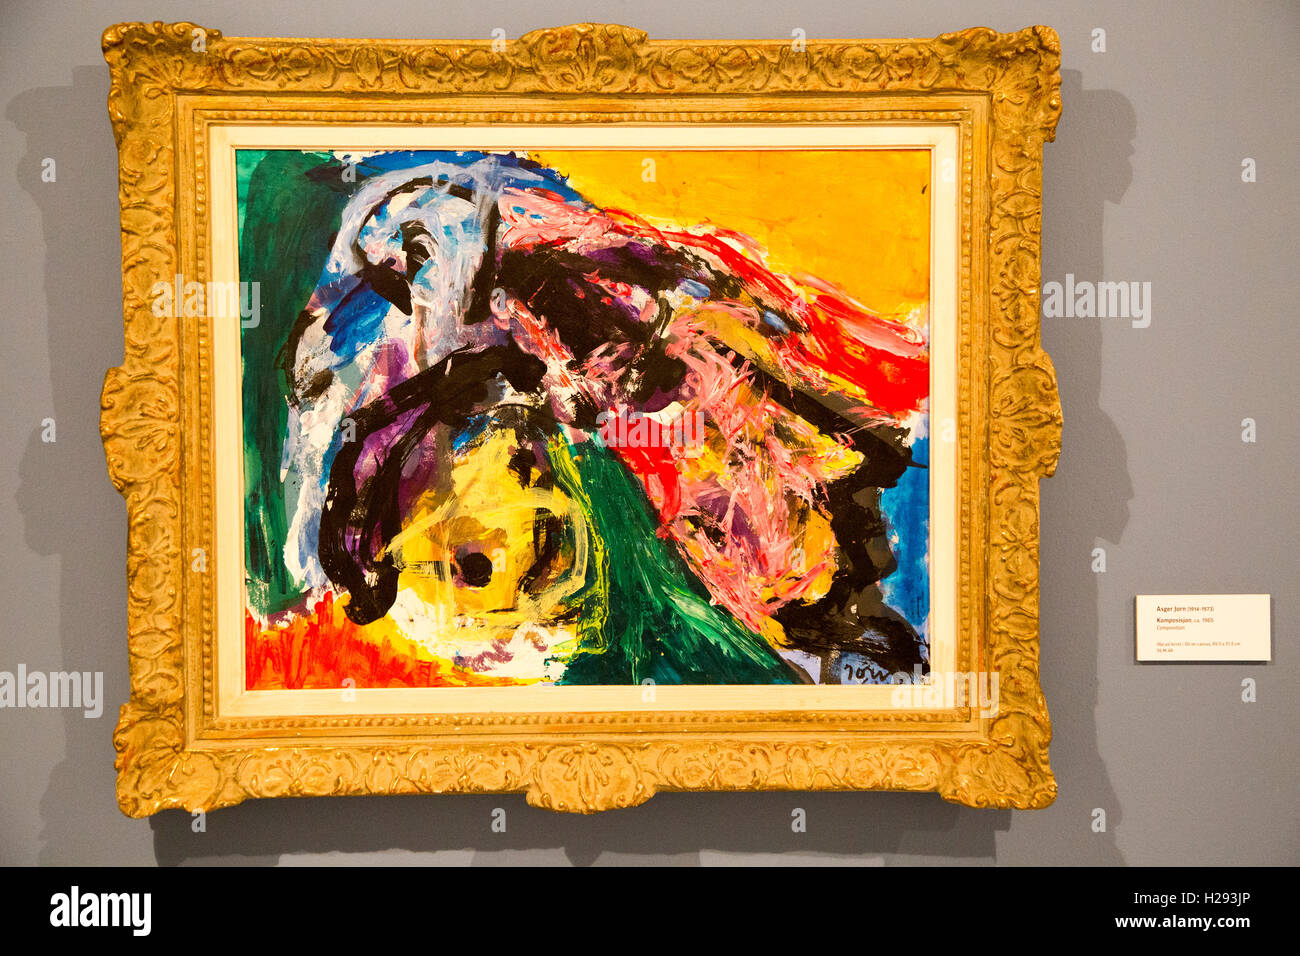 'Composition' 1965 by Asger Jorn 1914-1973, oil on canvas, Kode 4 art gallery Bergen, Norway Stock Photo